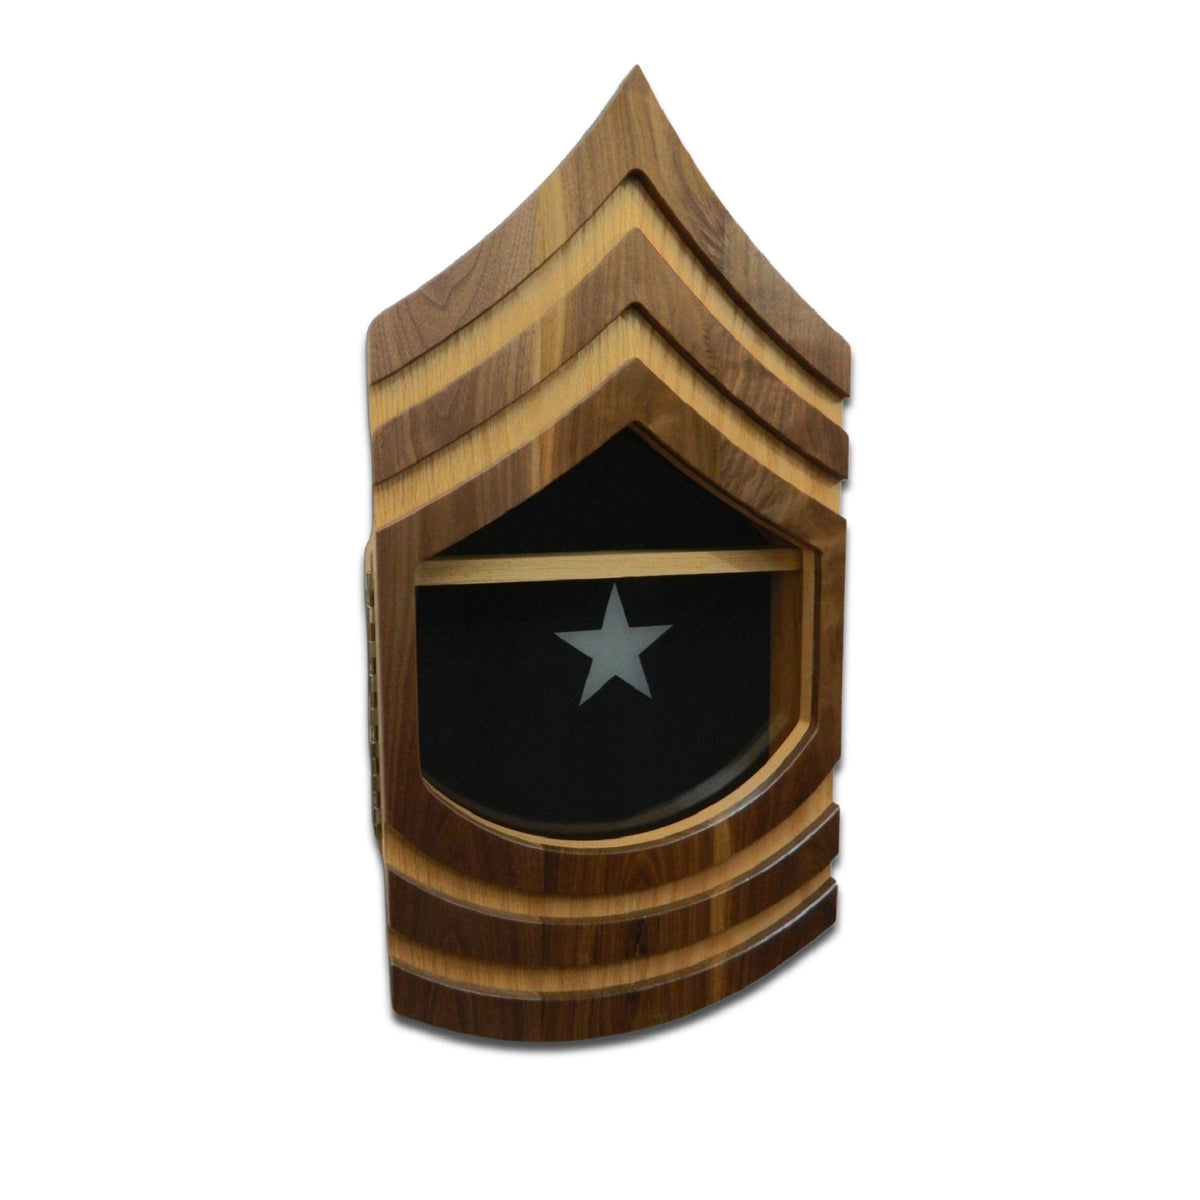 Military retirement shadow box for US Army Sergeant Major. Made of real Oak and Walnut hardwood. Holds a 3'x5' folded flag. Shown with black felt.